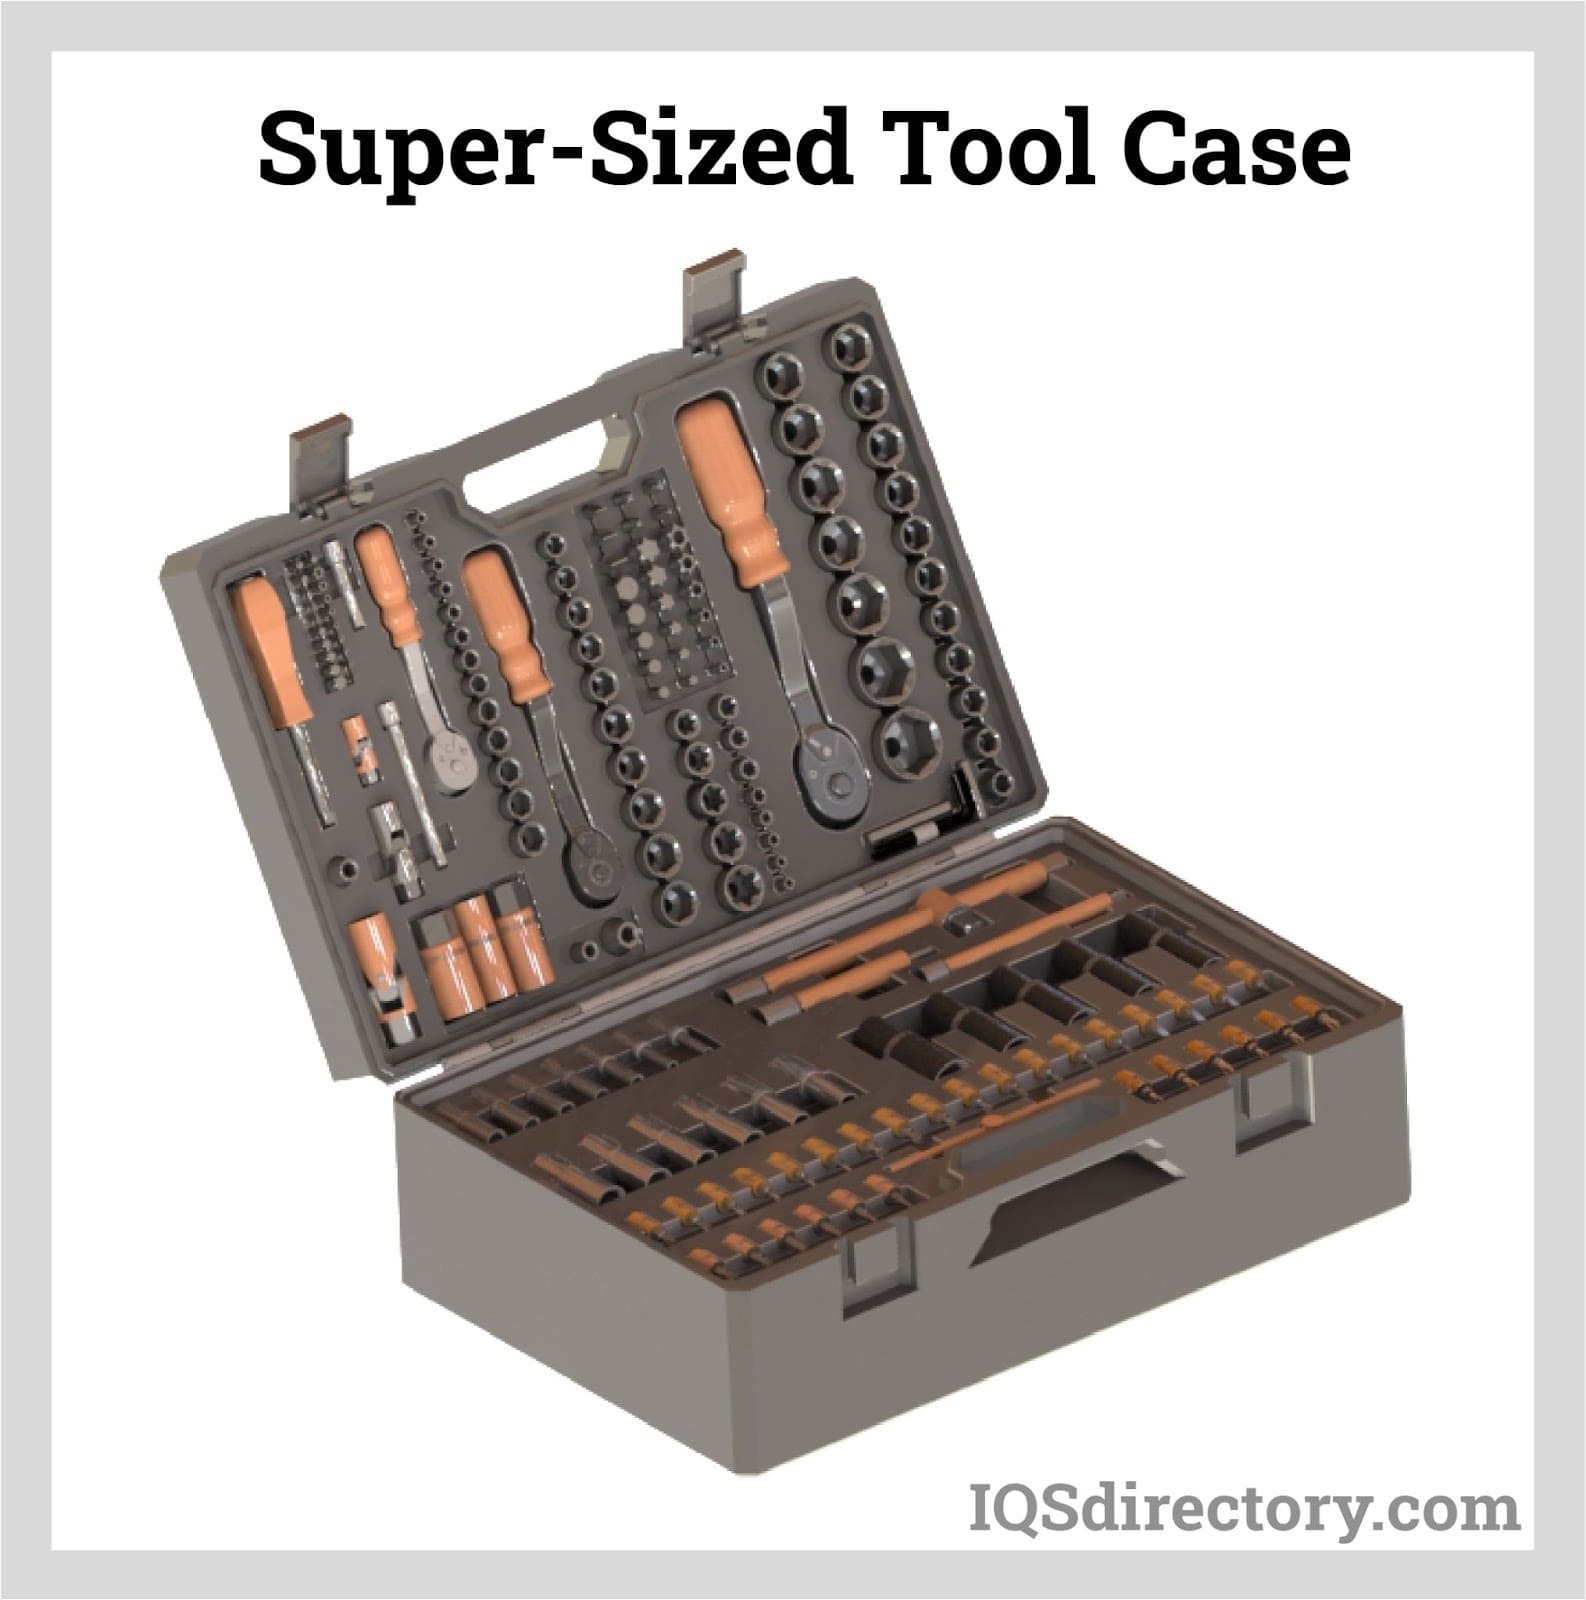 Super-Sized Tool Case